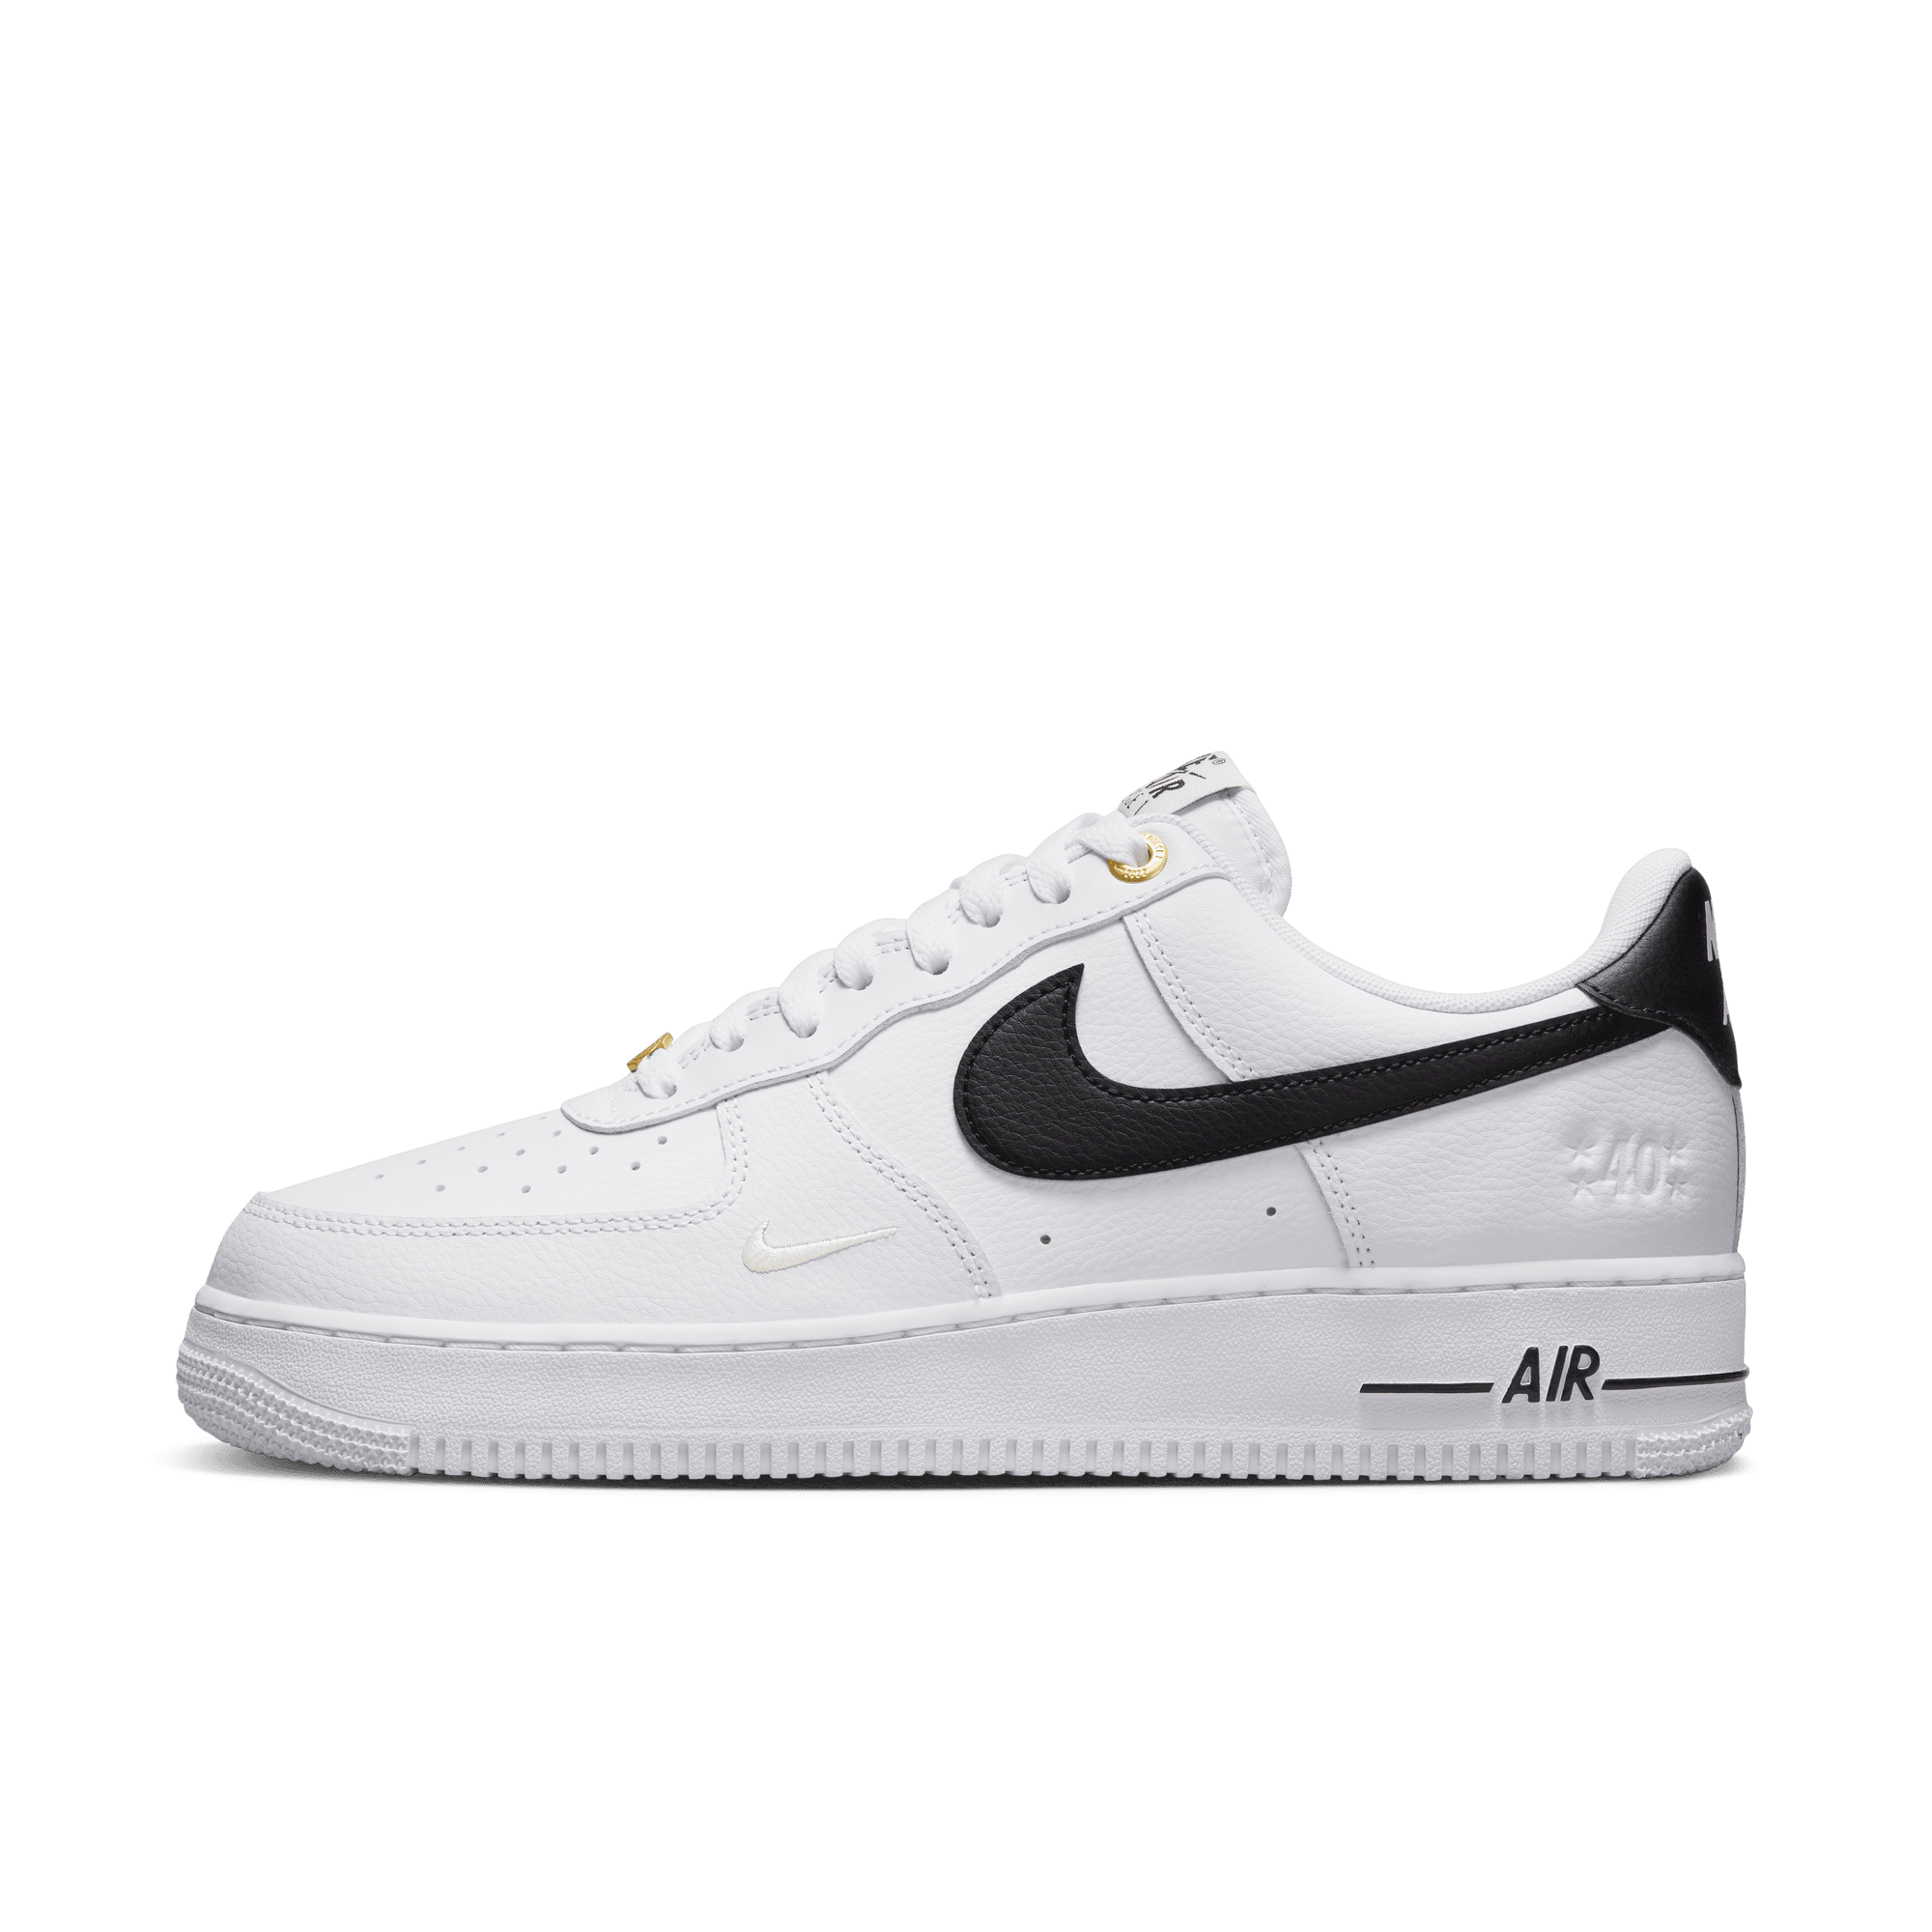 Feel the FORCE. Two new colorways of the Nike Air Force 1 '07 LV8 Utility  (EU 40 - 47,5, 110€) and both Ni…